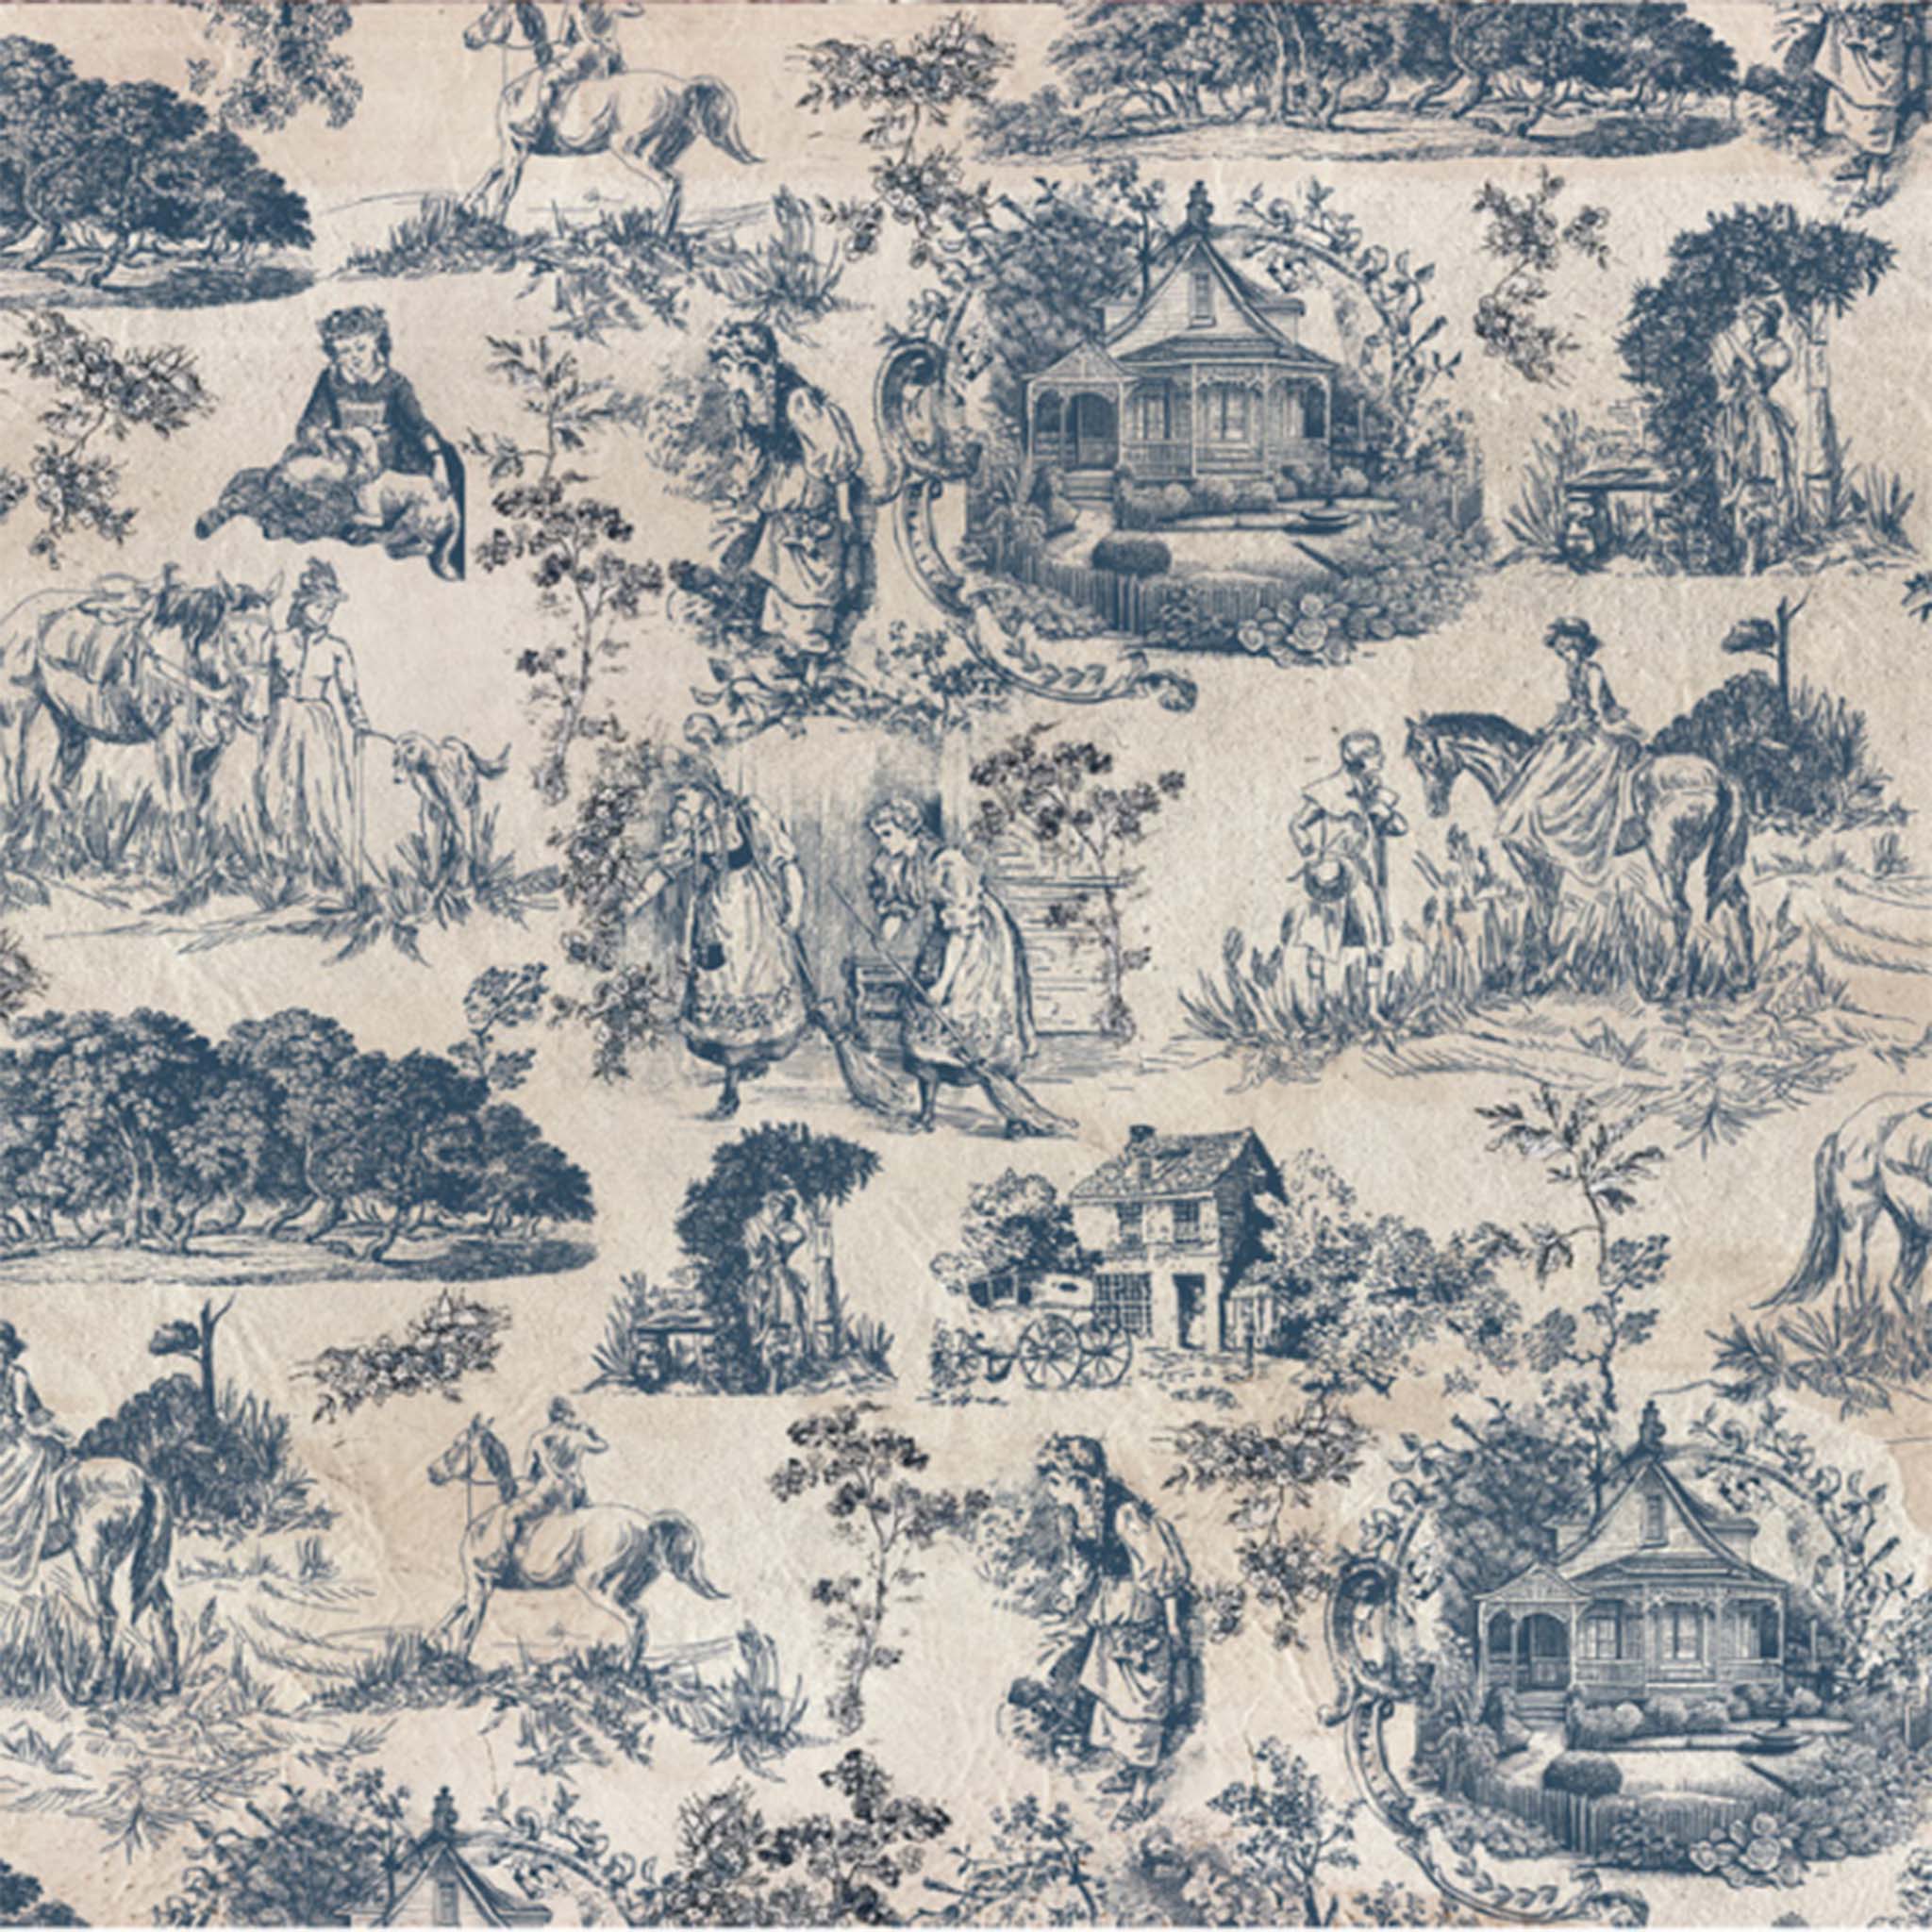 Close-up of an A1 fiber paper that features deep dusty blue toile print featuring people and horses in the countryside.